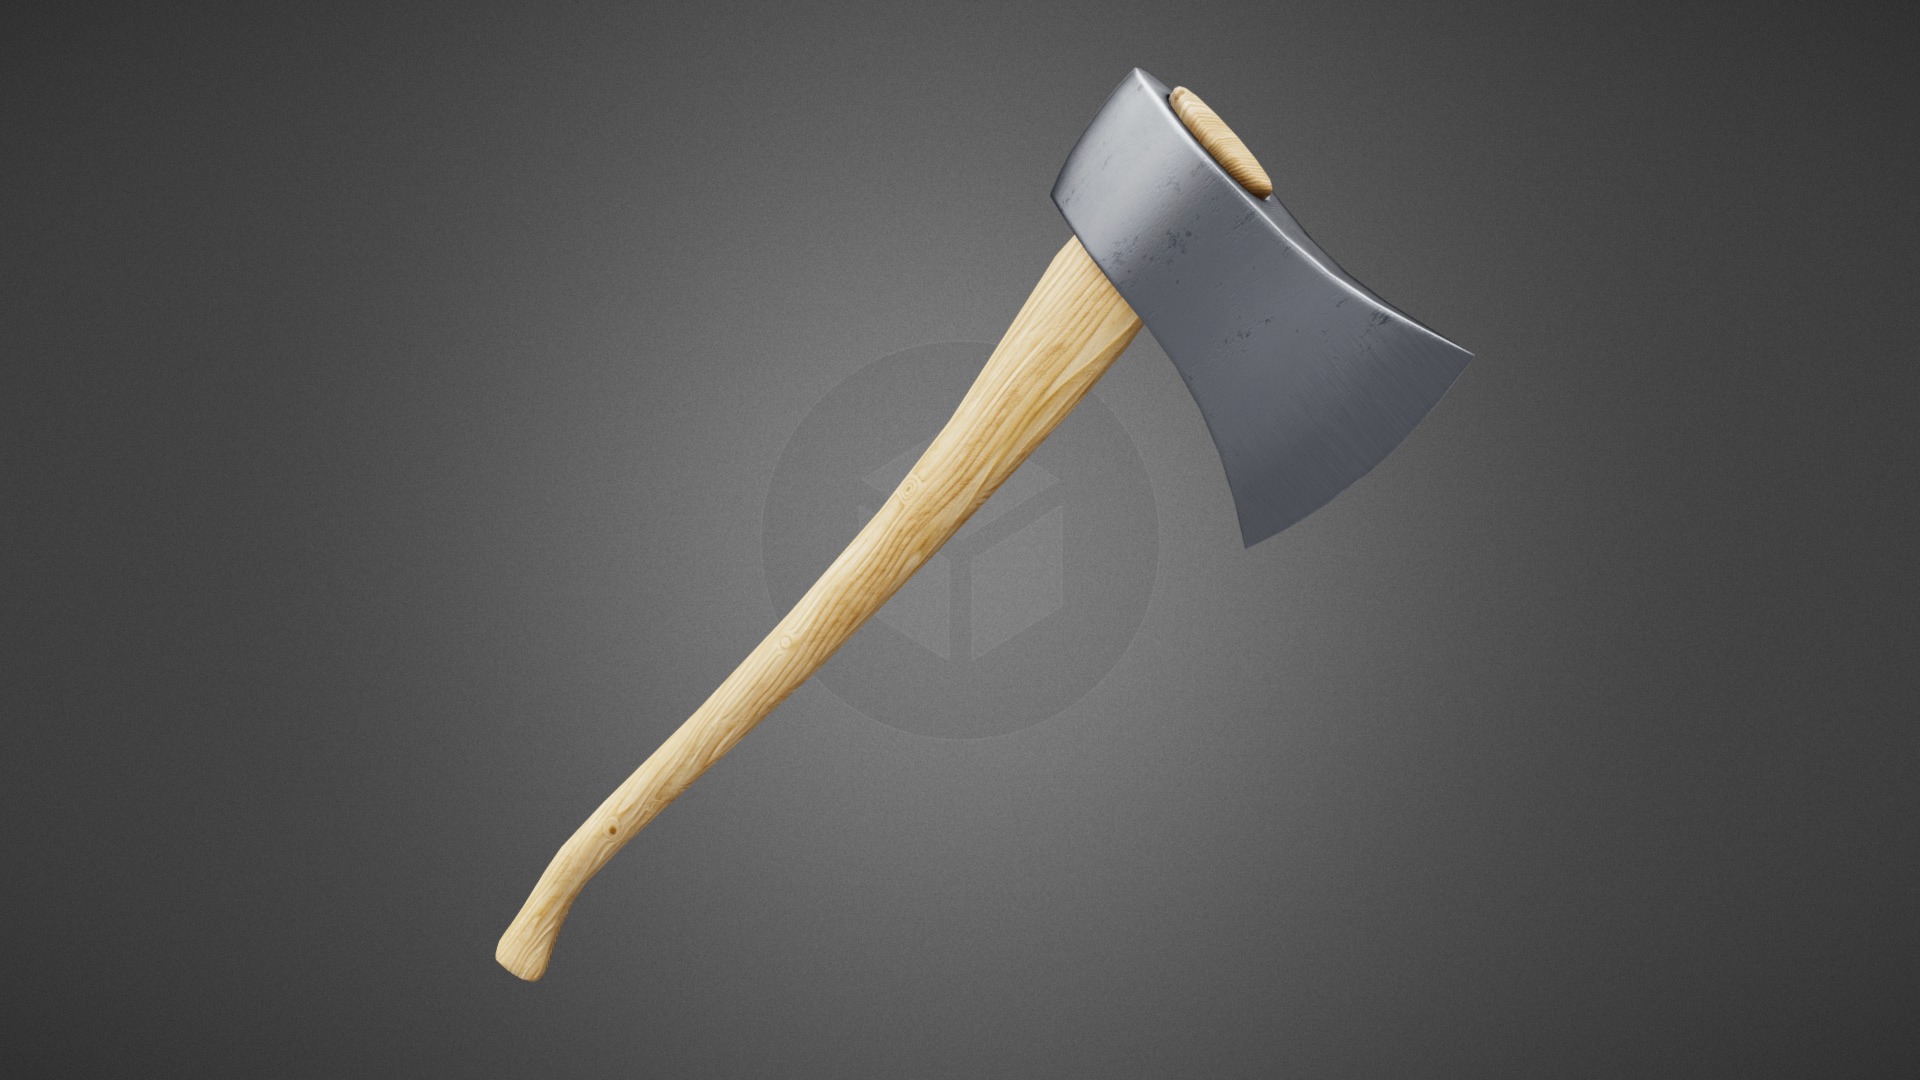 3D model Woodcutter’s Axe - This is a 3D model of the Woodcutter's Axe. The 3D model is about a wooden spoon with a handle.